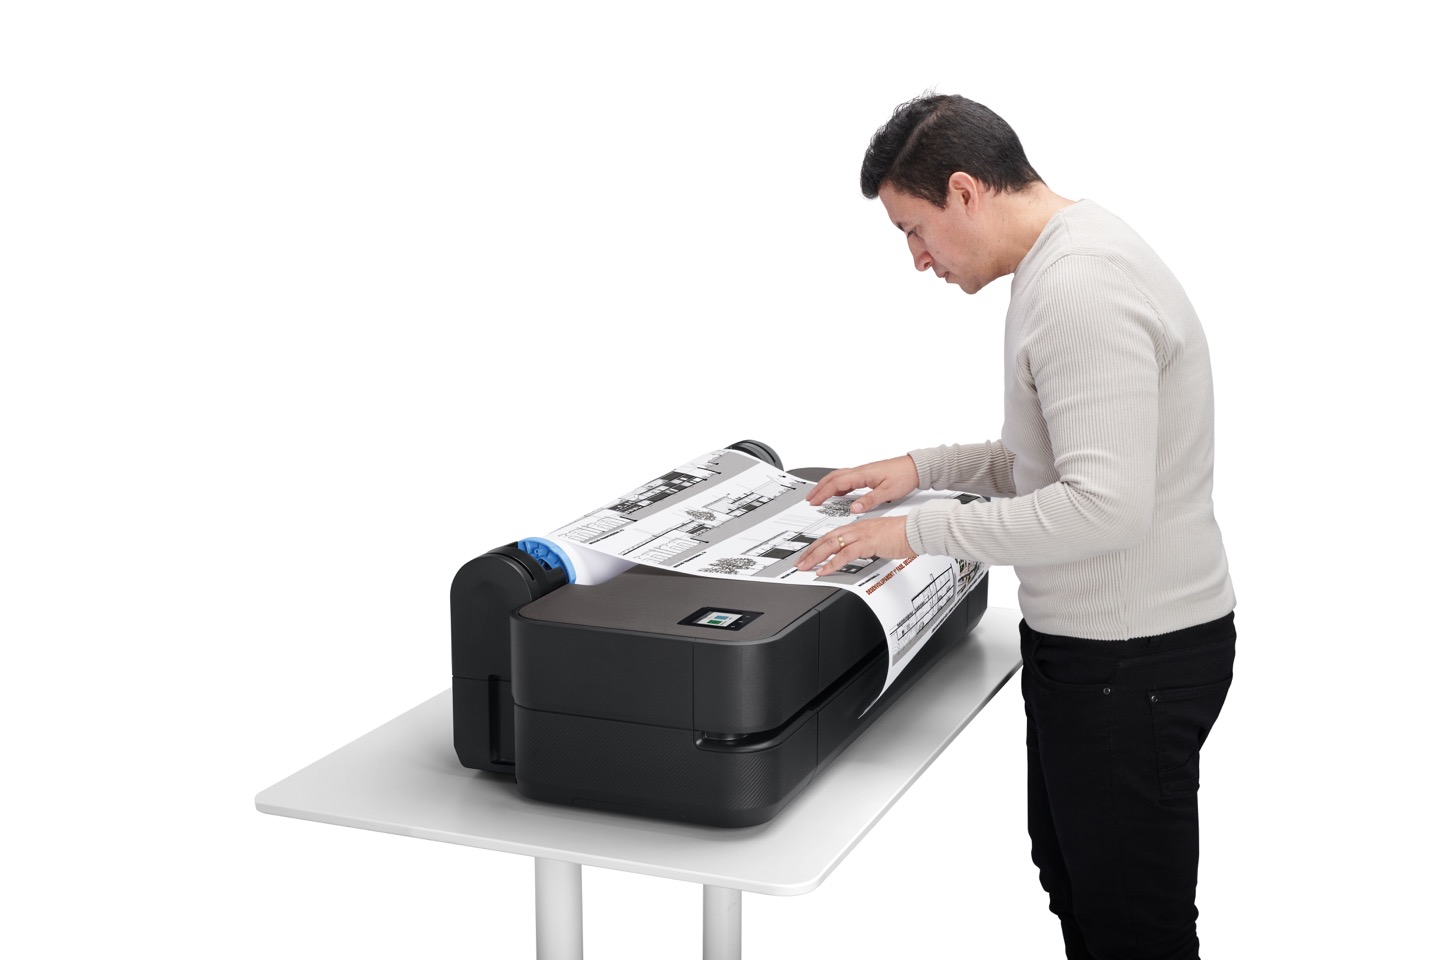 5HB06A with Mobile Printing Hewlett Packard DesignJet T250 Large Format Compact Wireless Plotter Printer + Cleaning Kit 24 